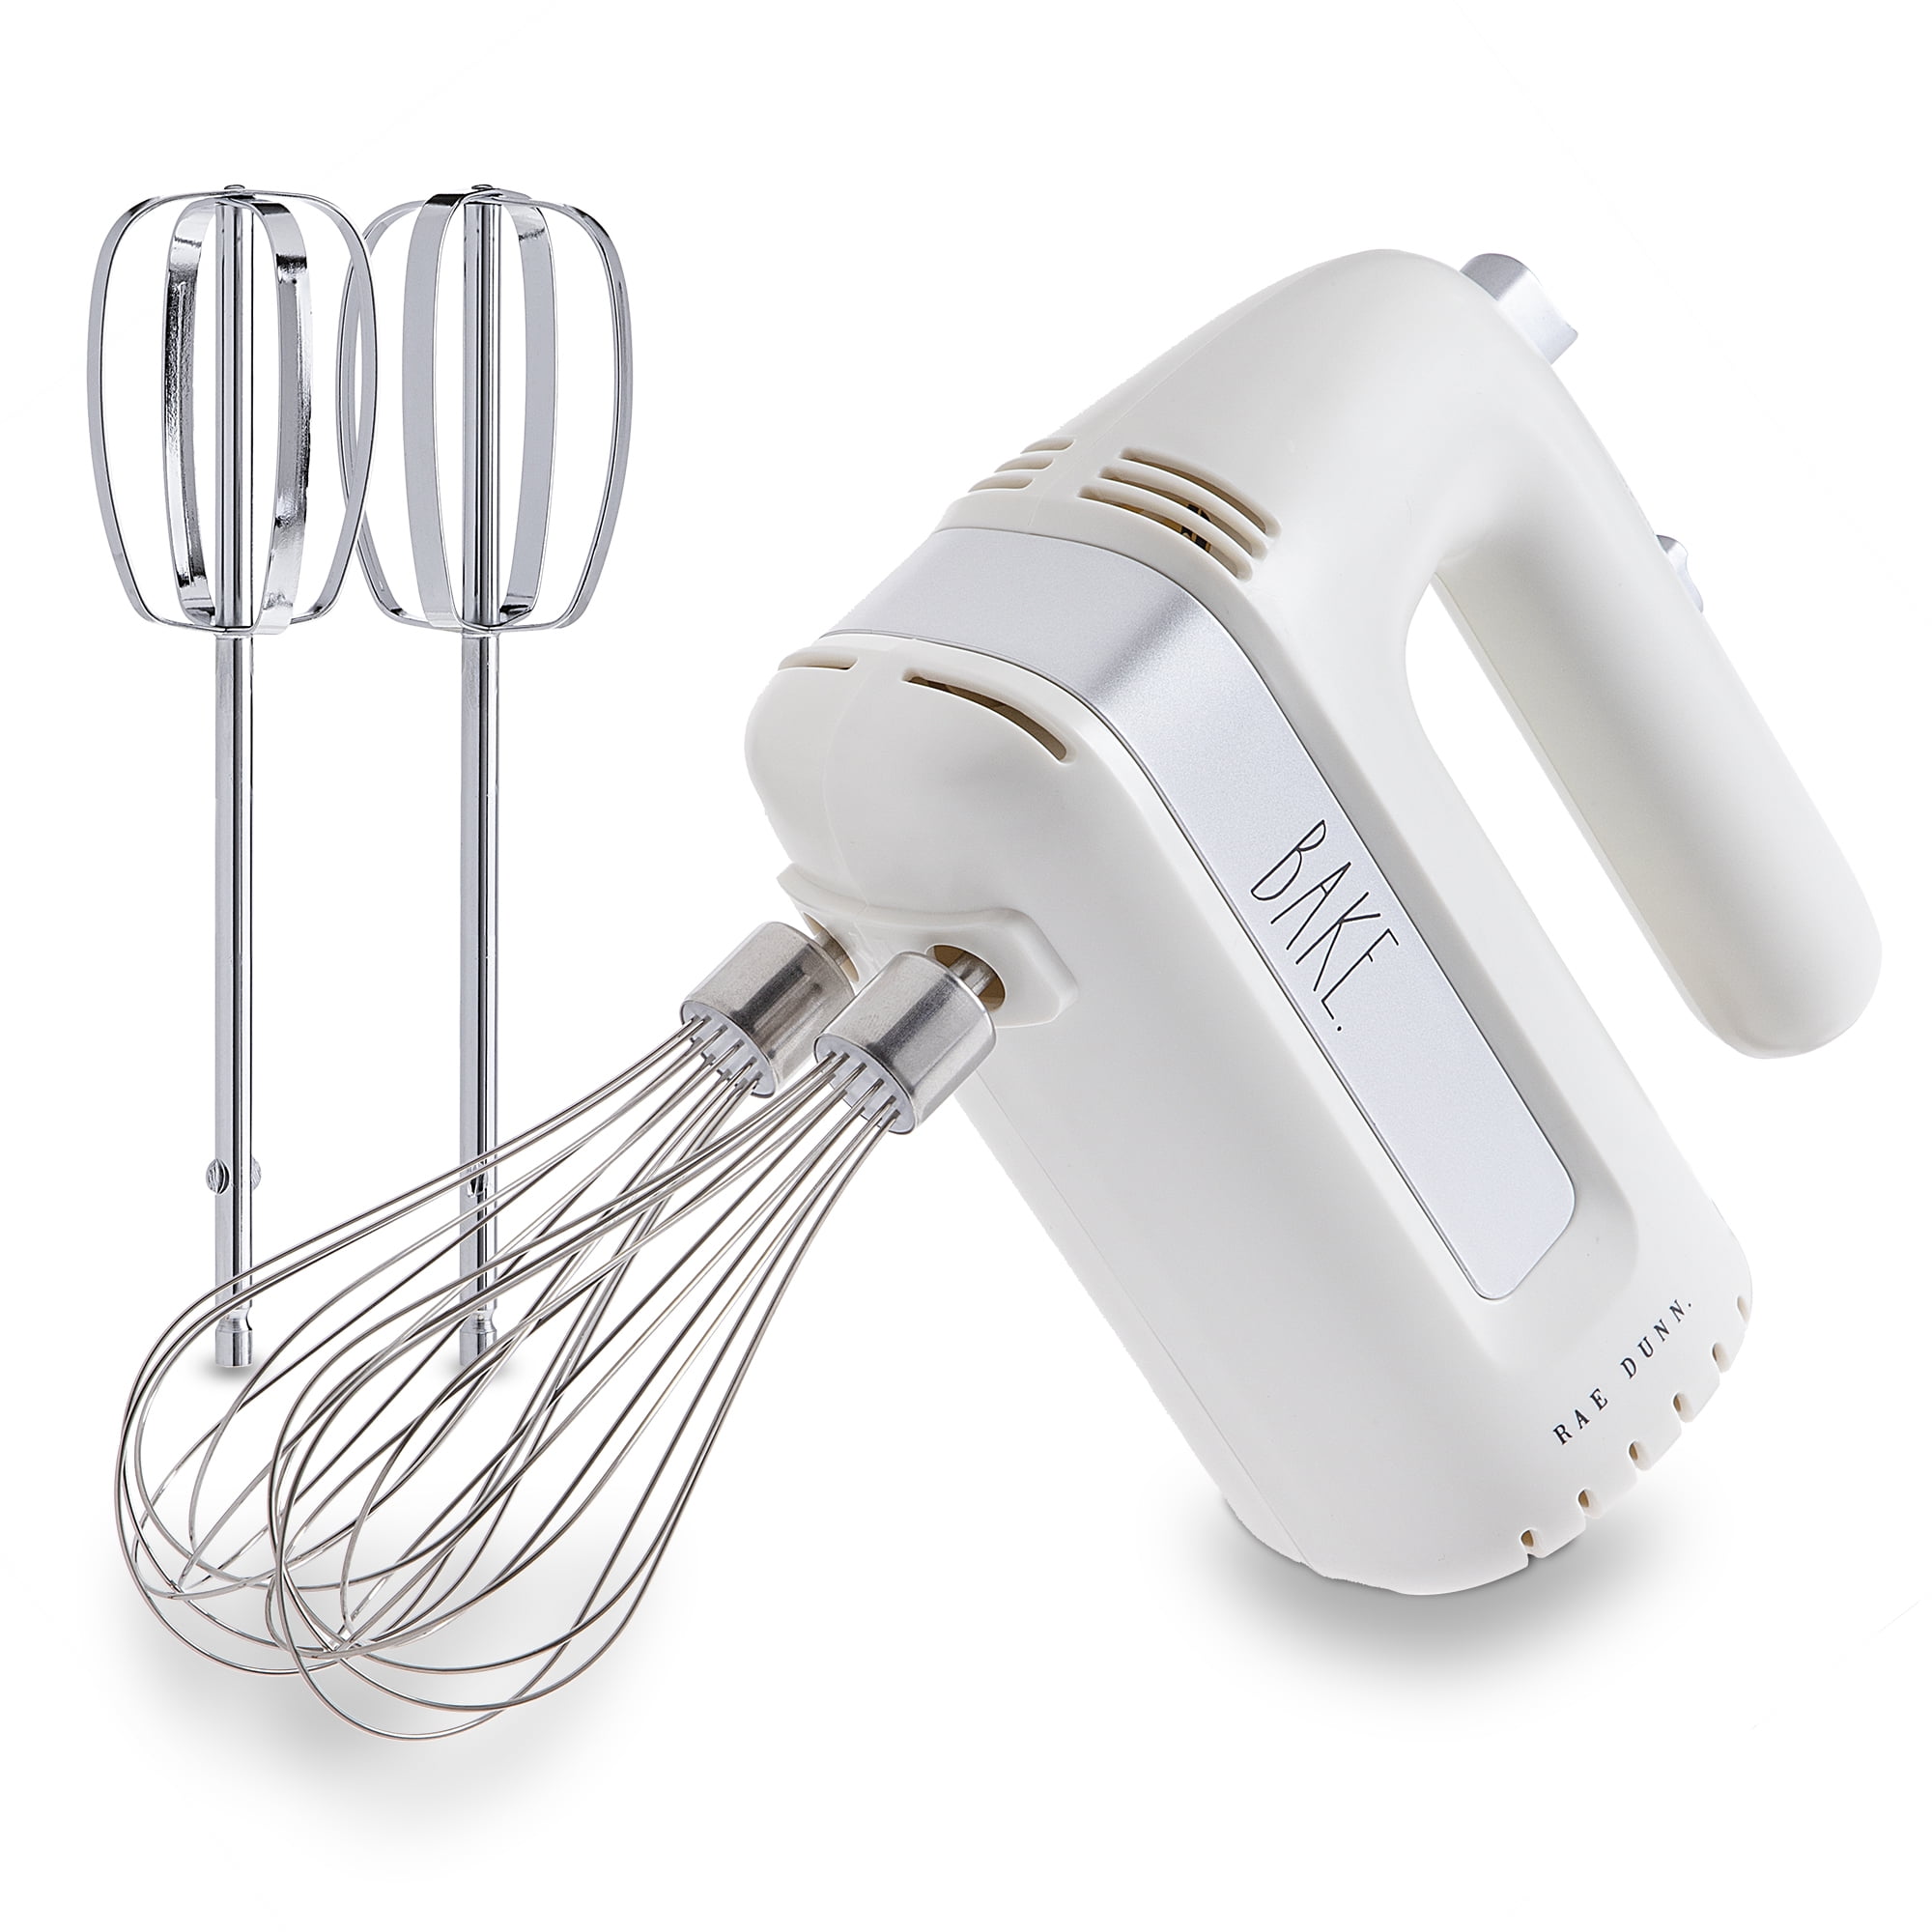 Rae Dunn Electric Milk Frother White Froth Stainless Stand New